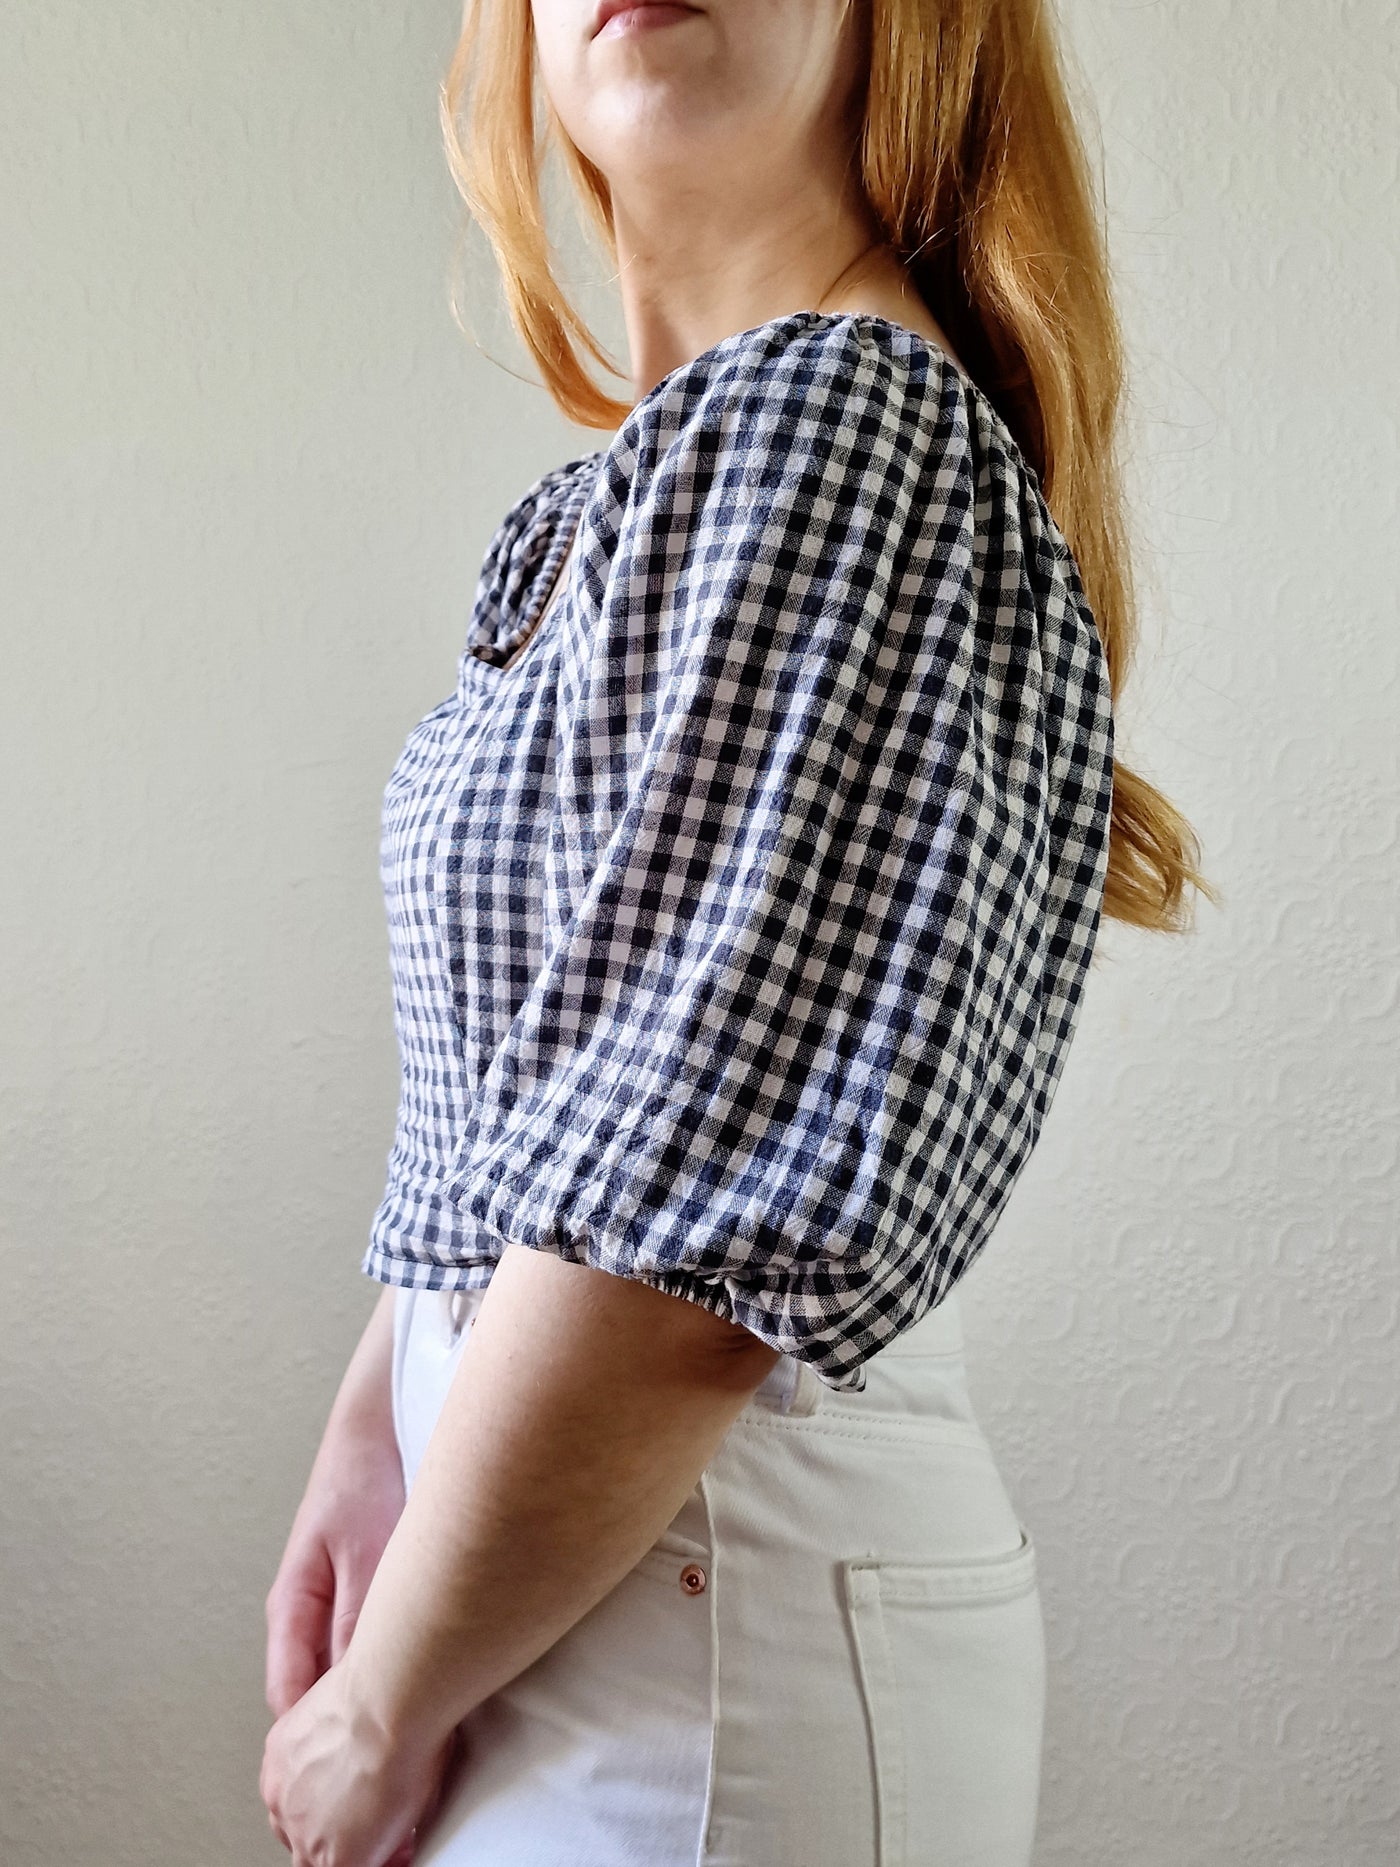 Vintage Black & White Gingham Cropped Blouse Top with Puff Sleeves - M